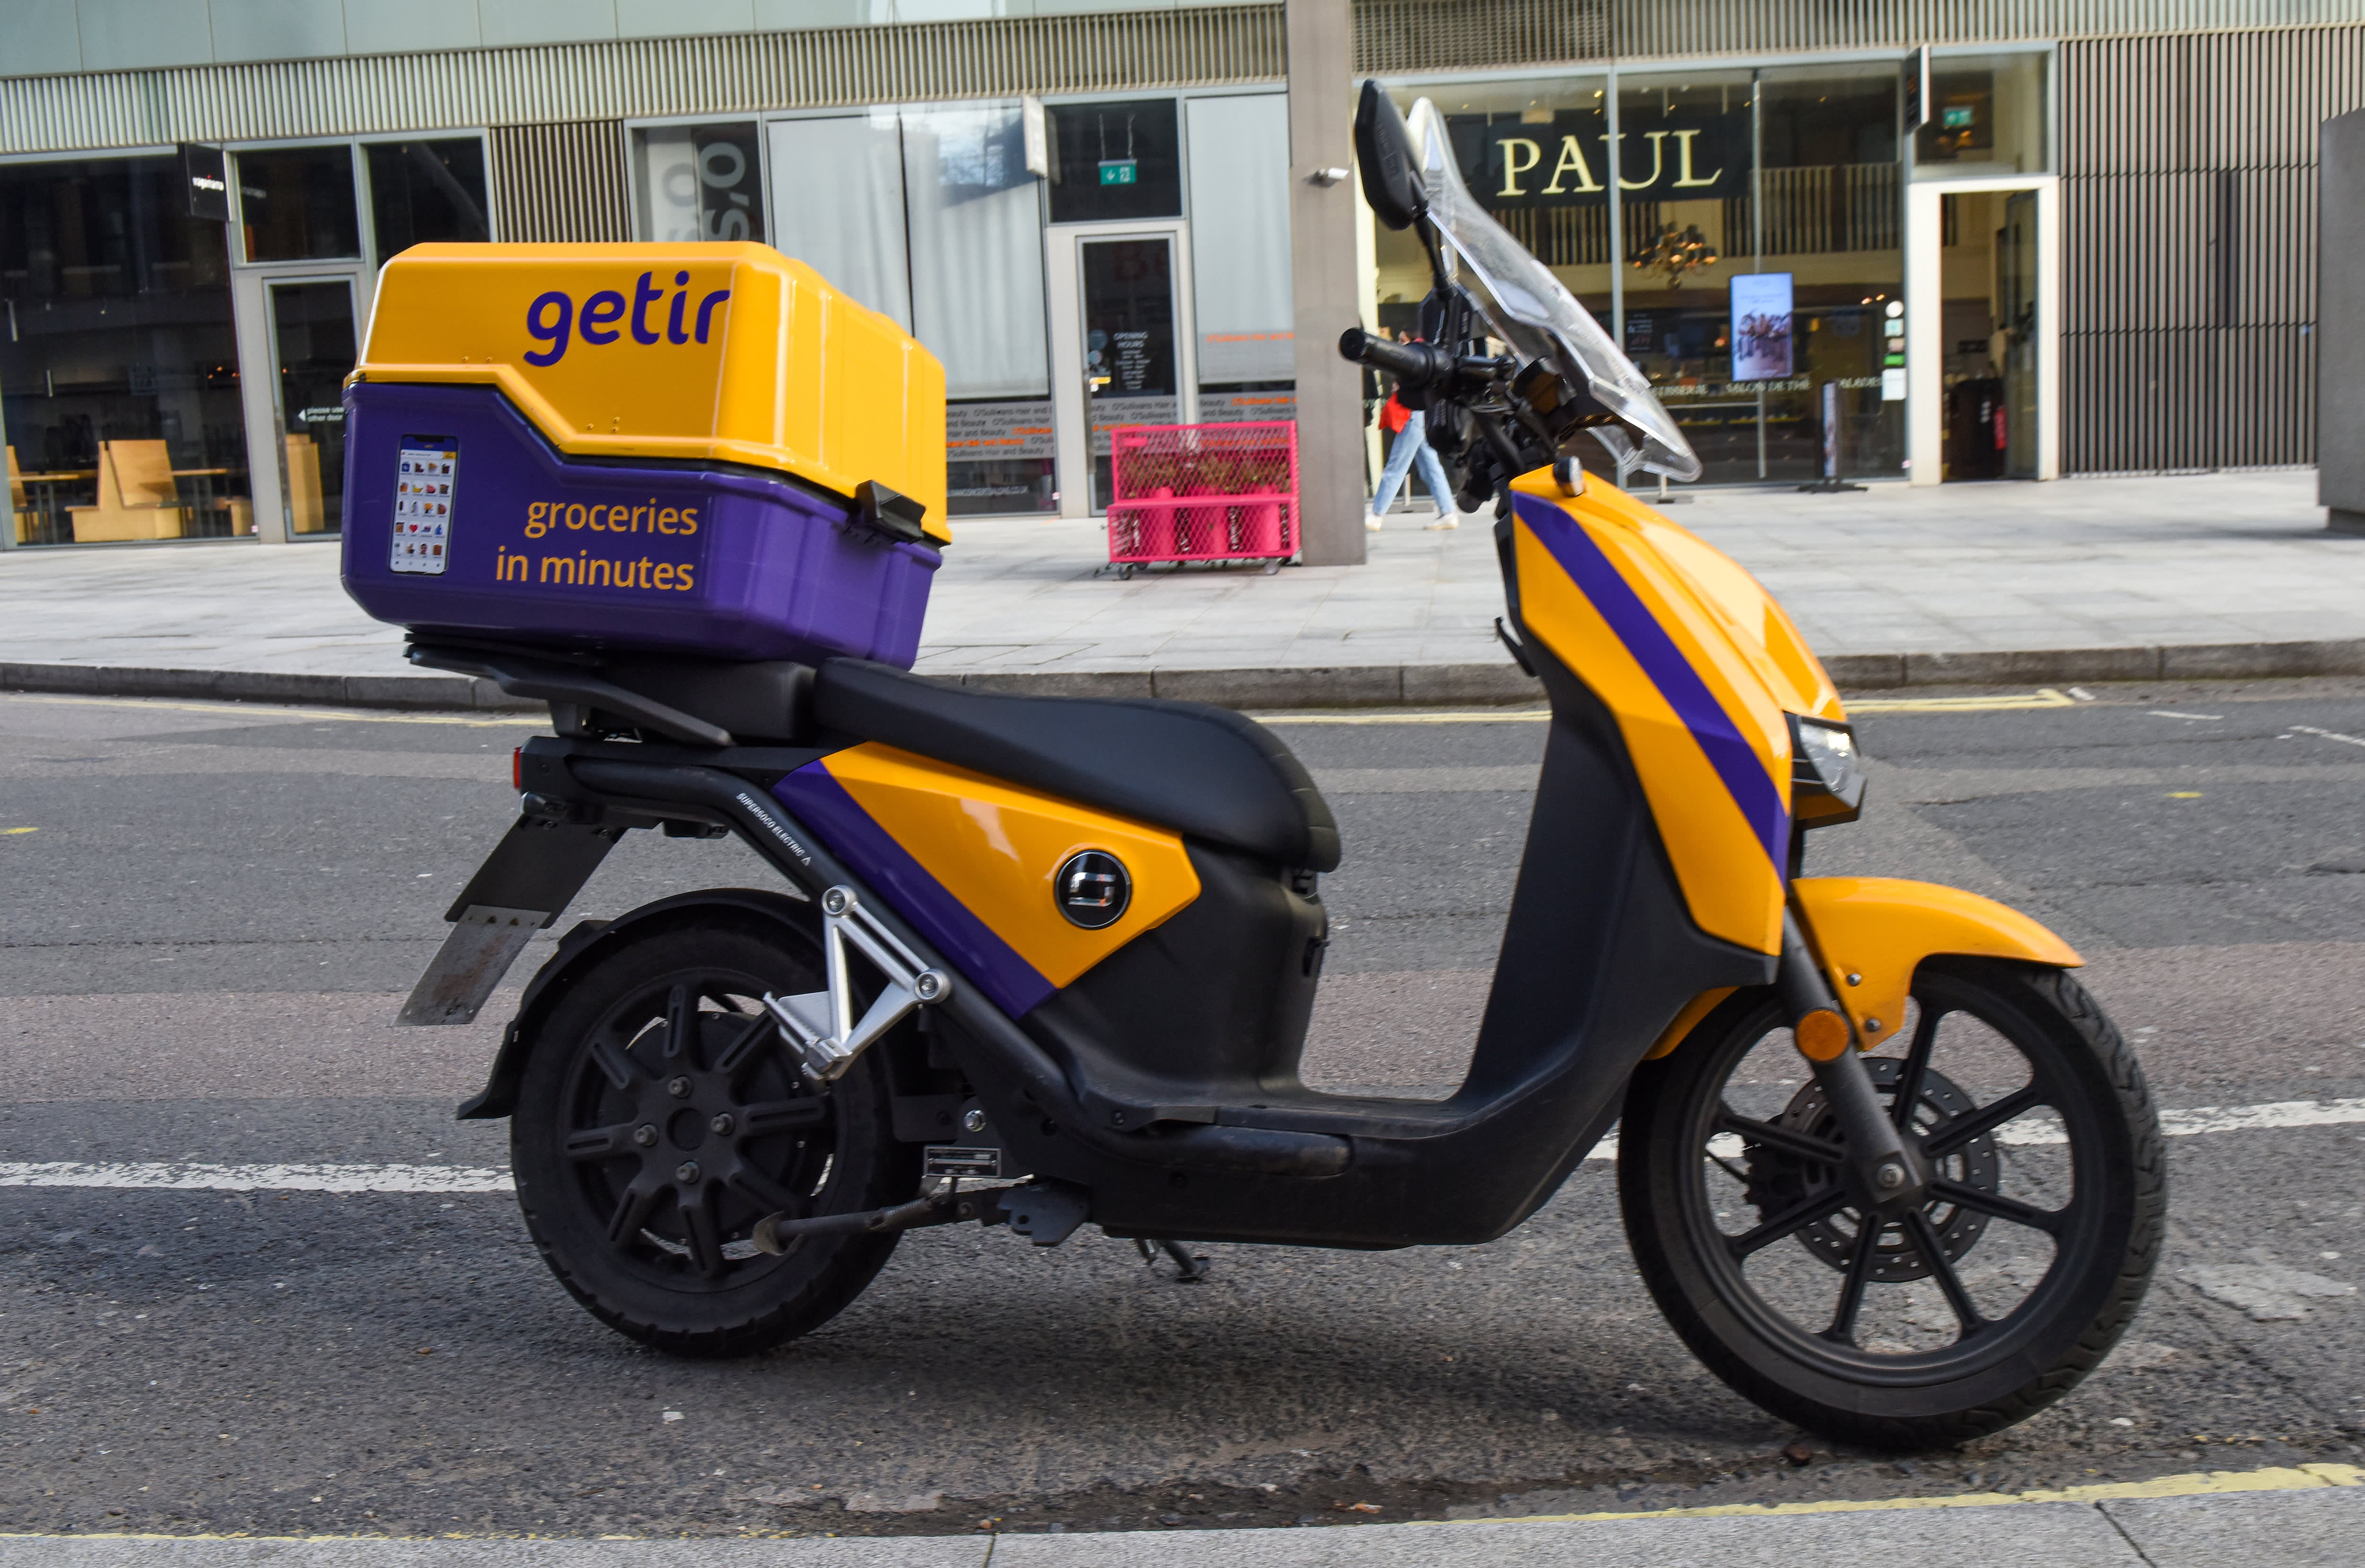 Apps that promise grocery deliveries in 10 minutes are invading Europe as shopping shifts online